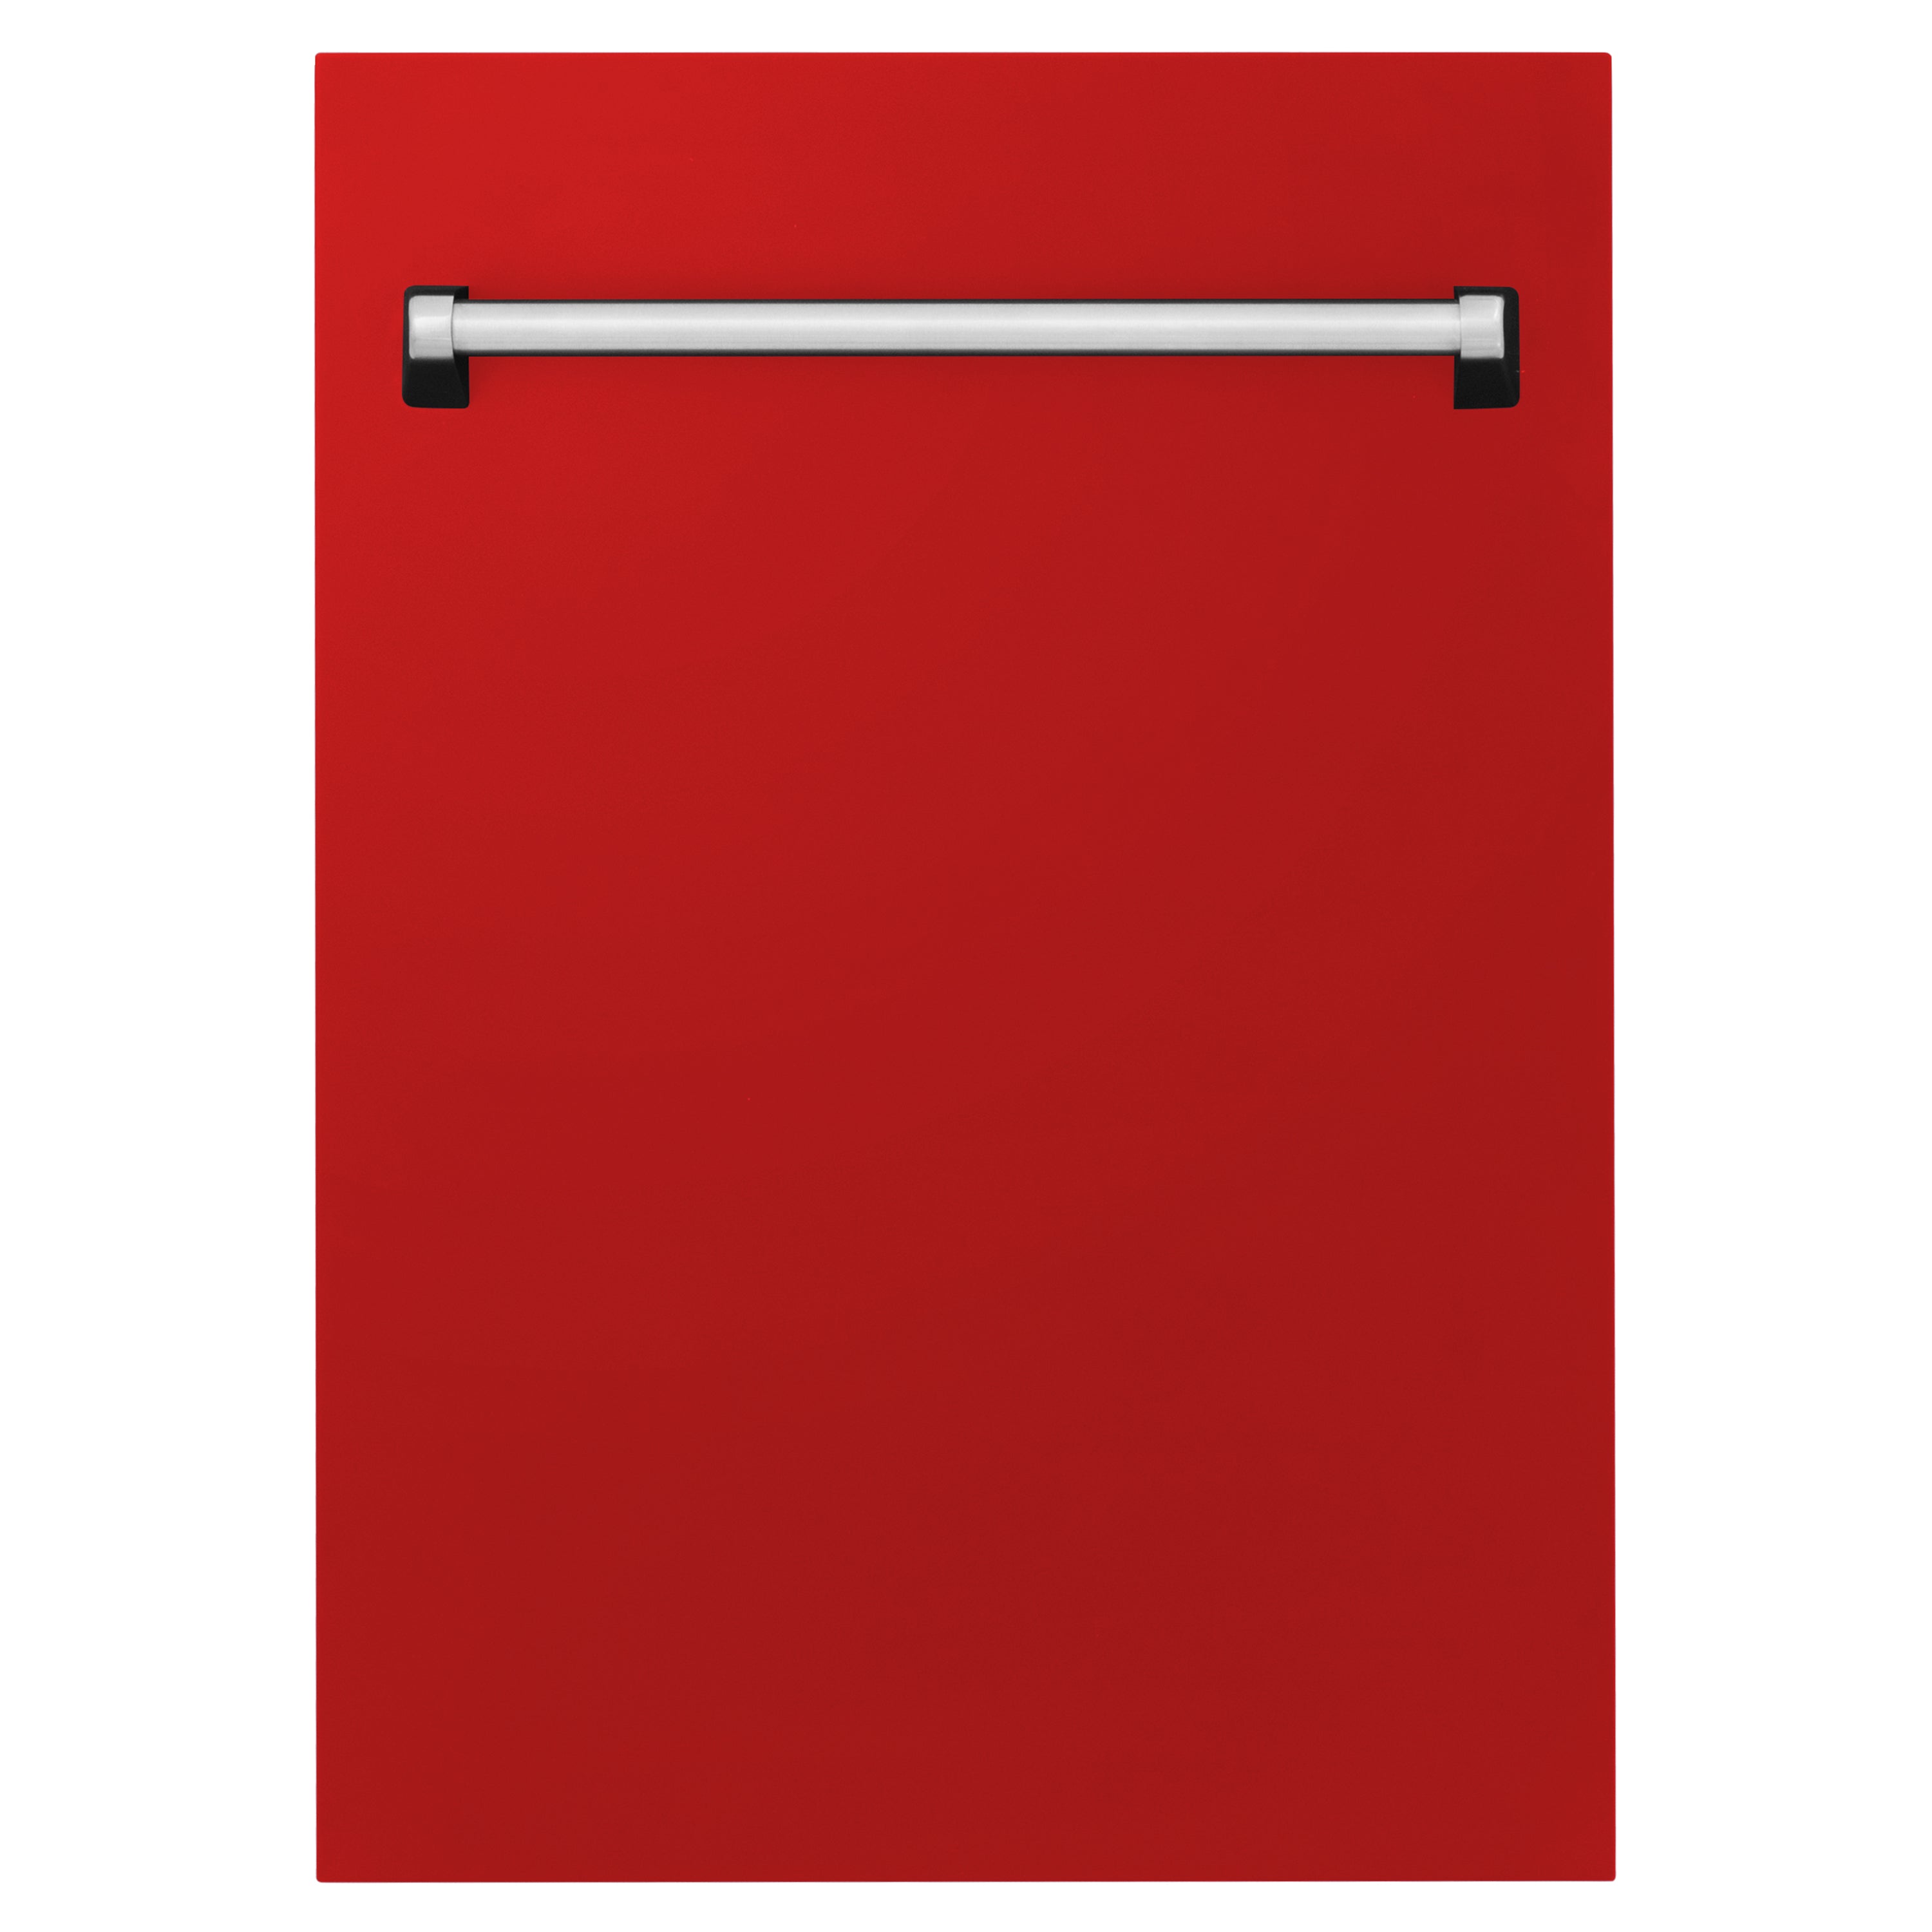 ZLINE 18" Tallac Dishwasher Panel in Red Matte with Traditional Handle (DPV-RM-18)